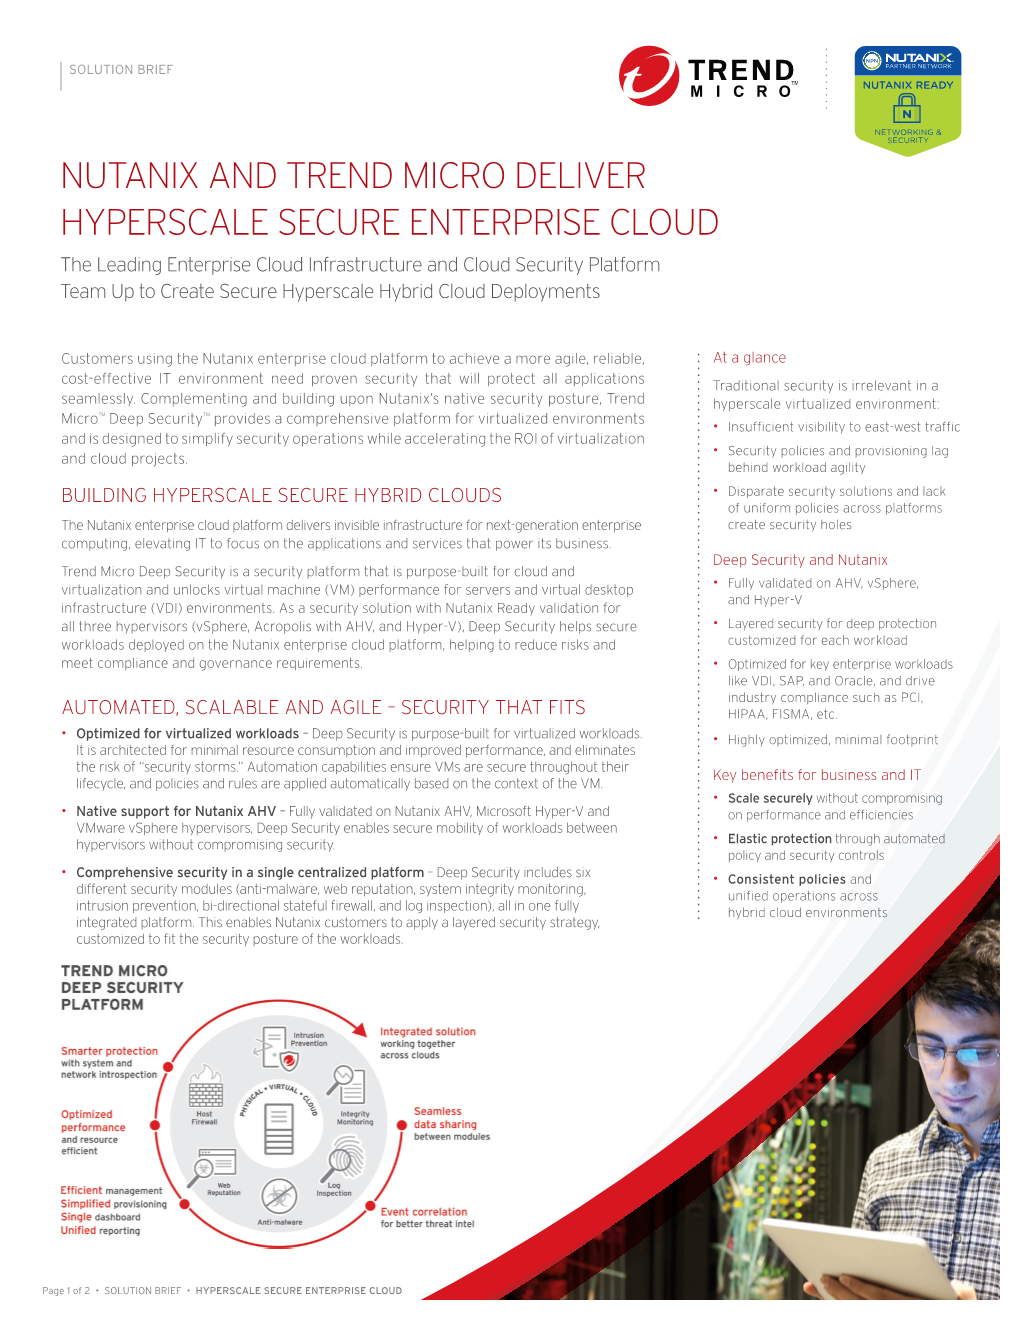 Nutanix and Trend Micro Deliver Hyperscale Secure